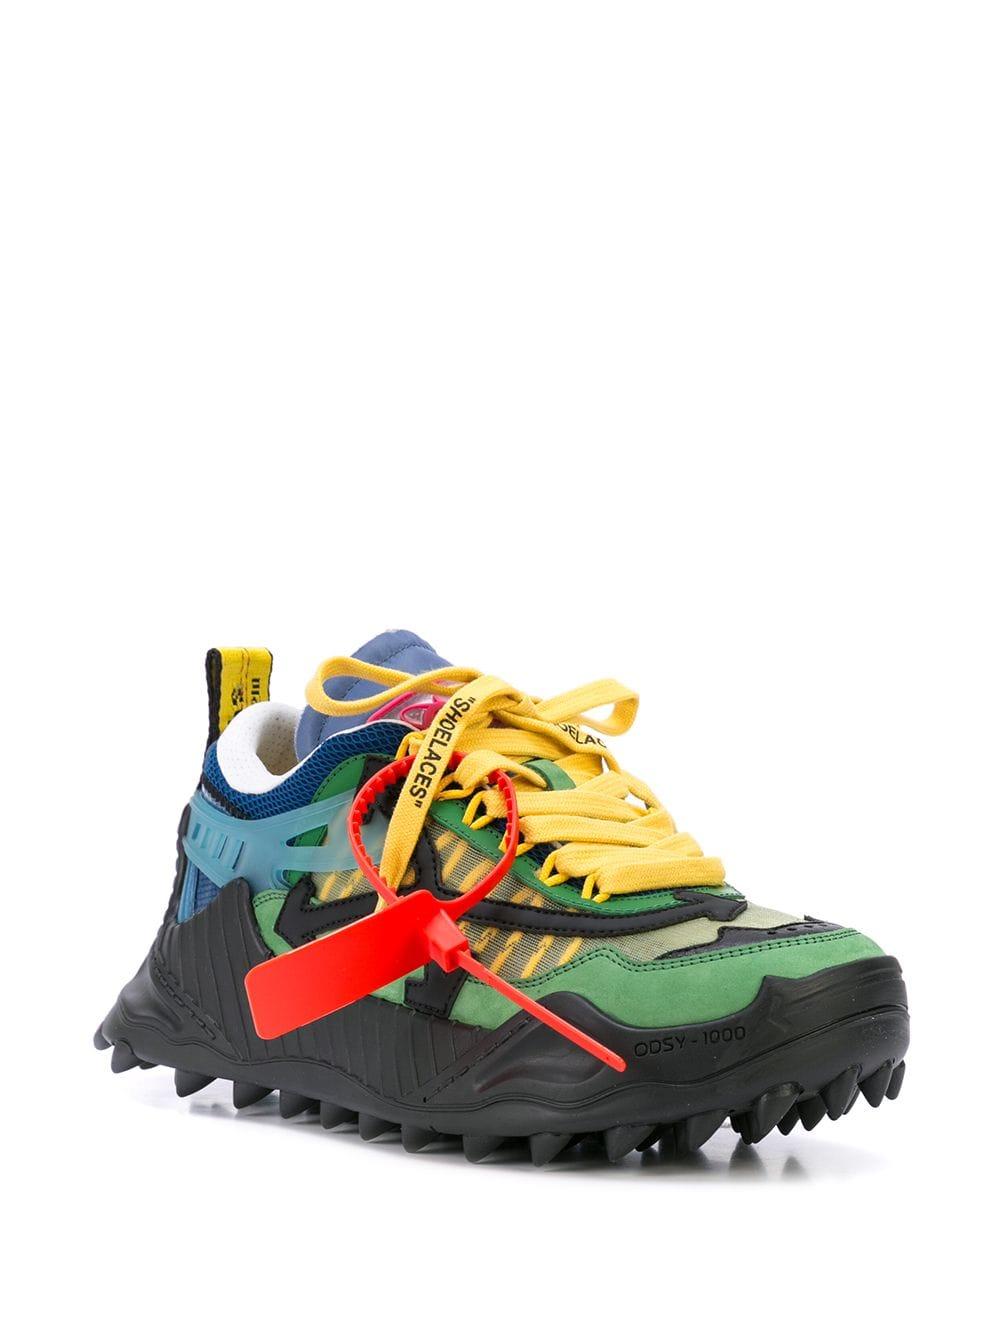 Off-White c/o Virgil Abloh Odsy-1000 Sneakers in Green - Lyst